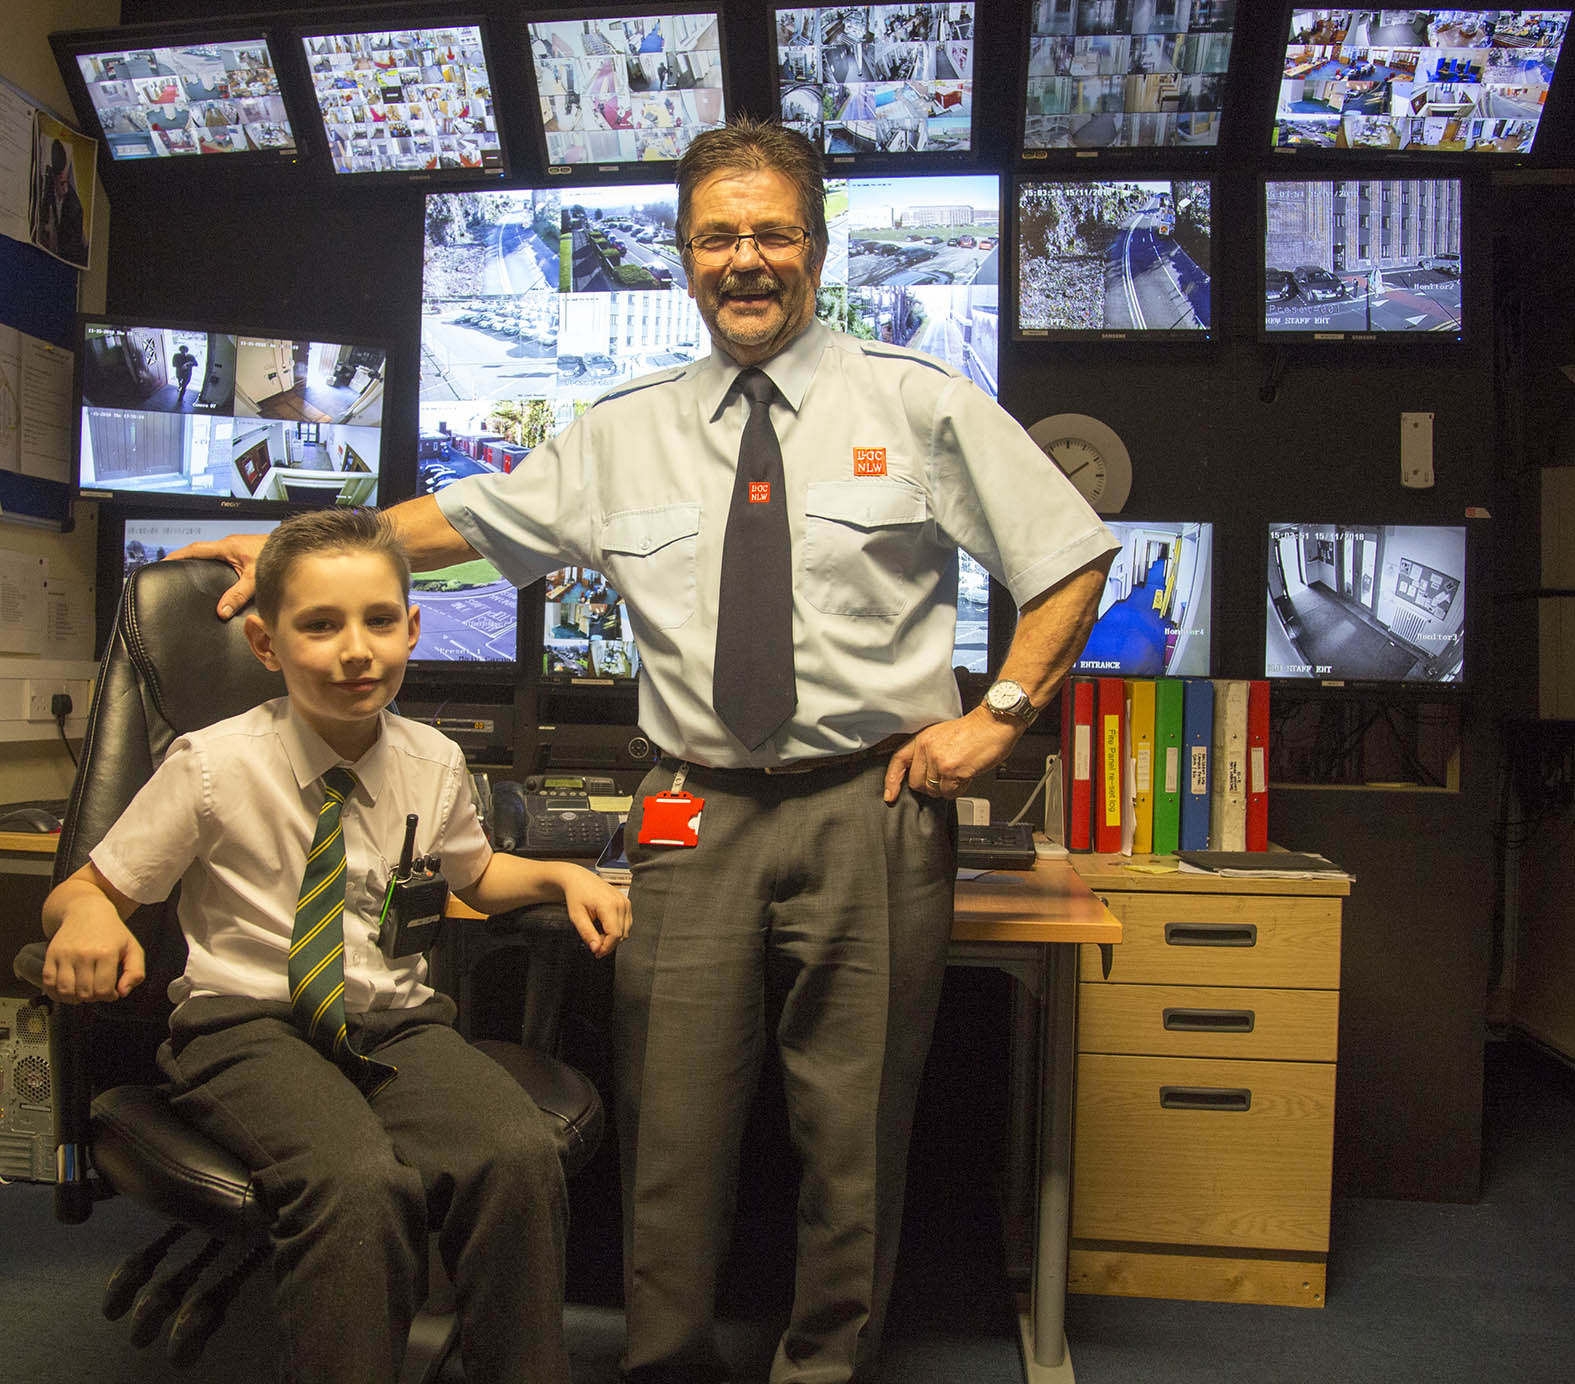 A young boy sits in a chair next to a security guard in front of CCTV screens at the National Library of Wales on Takeover Day.